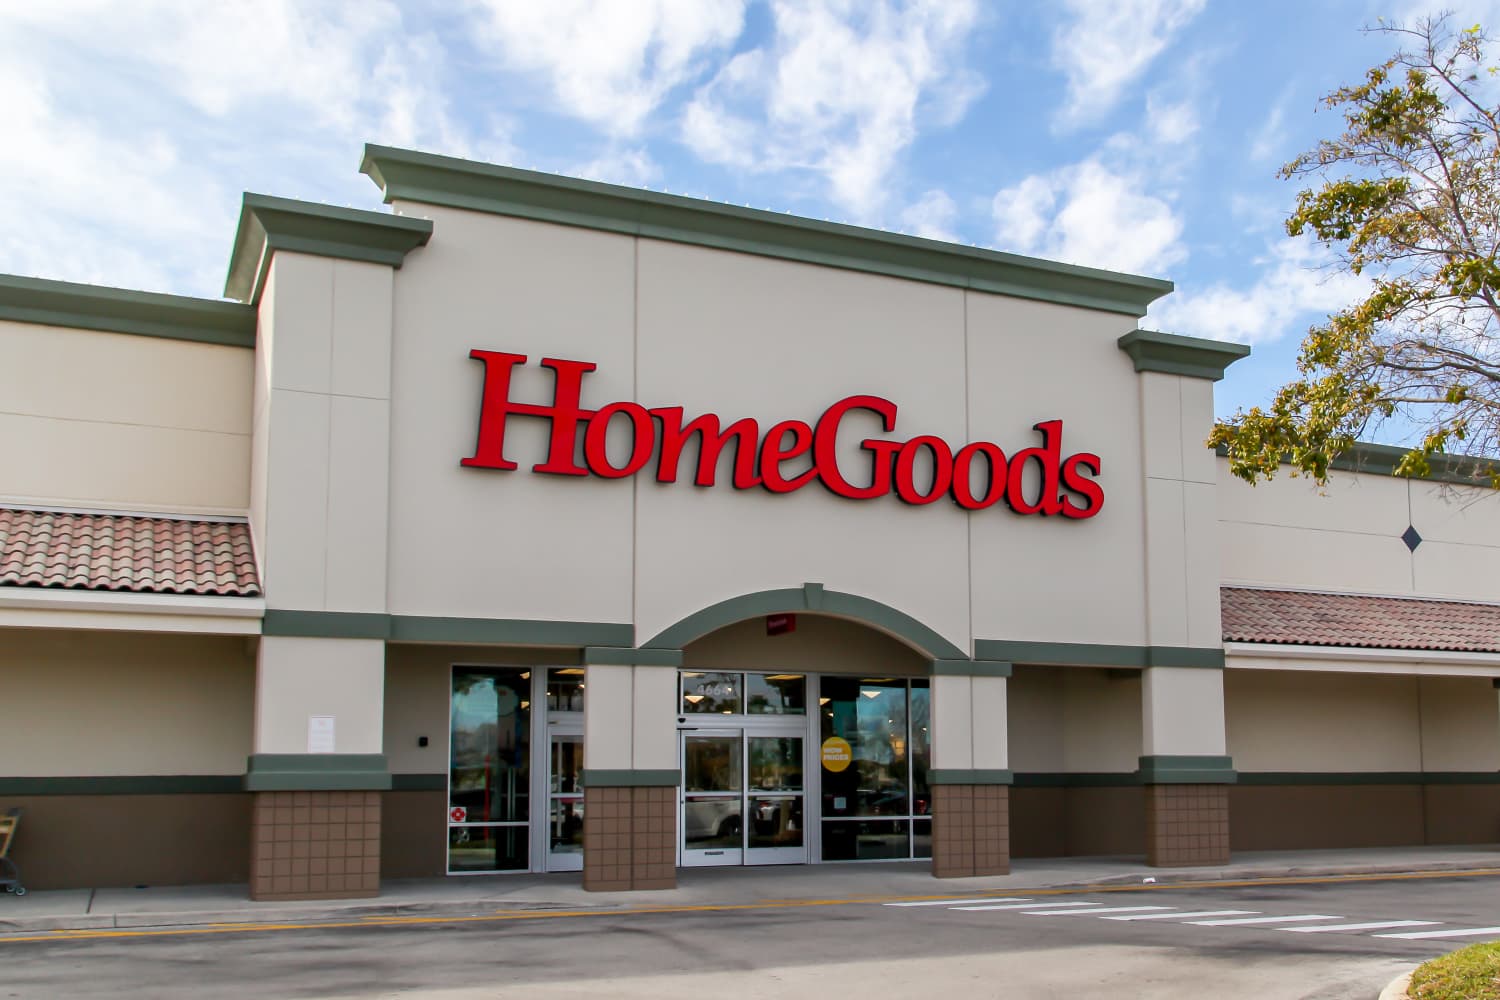 The Best “Gourmet” Grocery Hiding in HomeGoods (I Use It Every Single Morning)